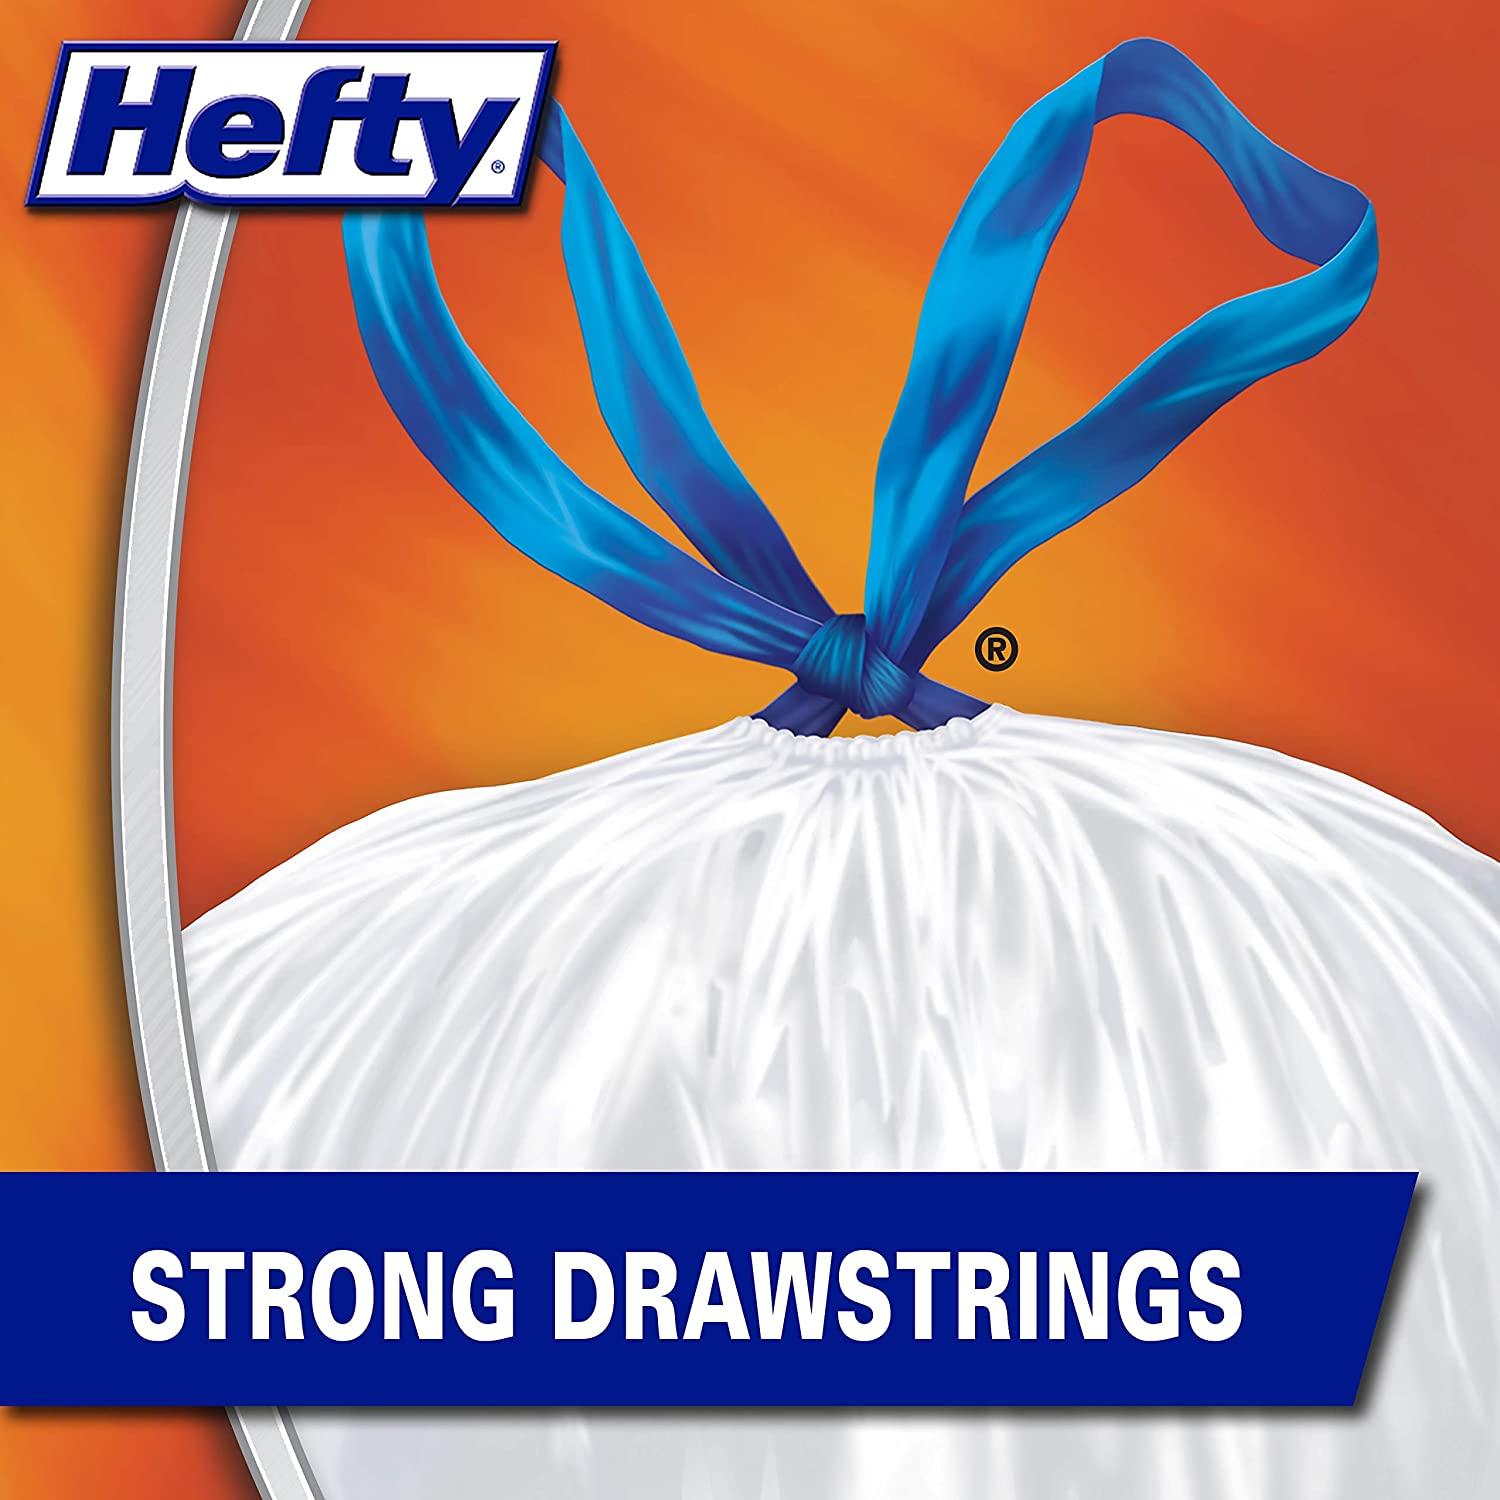 Hefty Strong Tall Kitchen Trash Bags, Unscented, 13 Gallon, 90